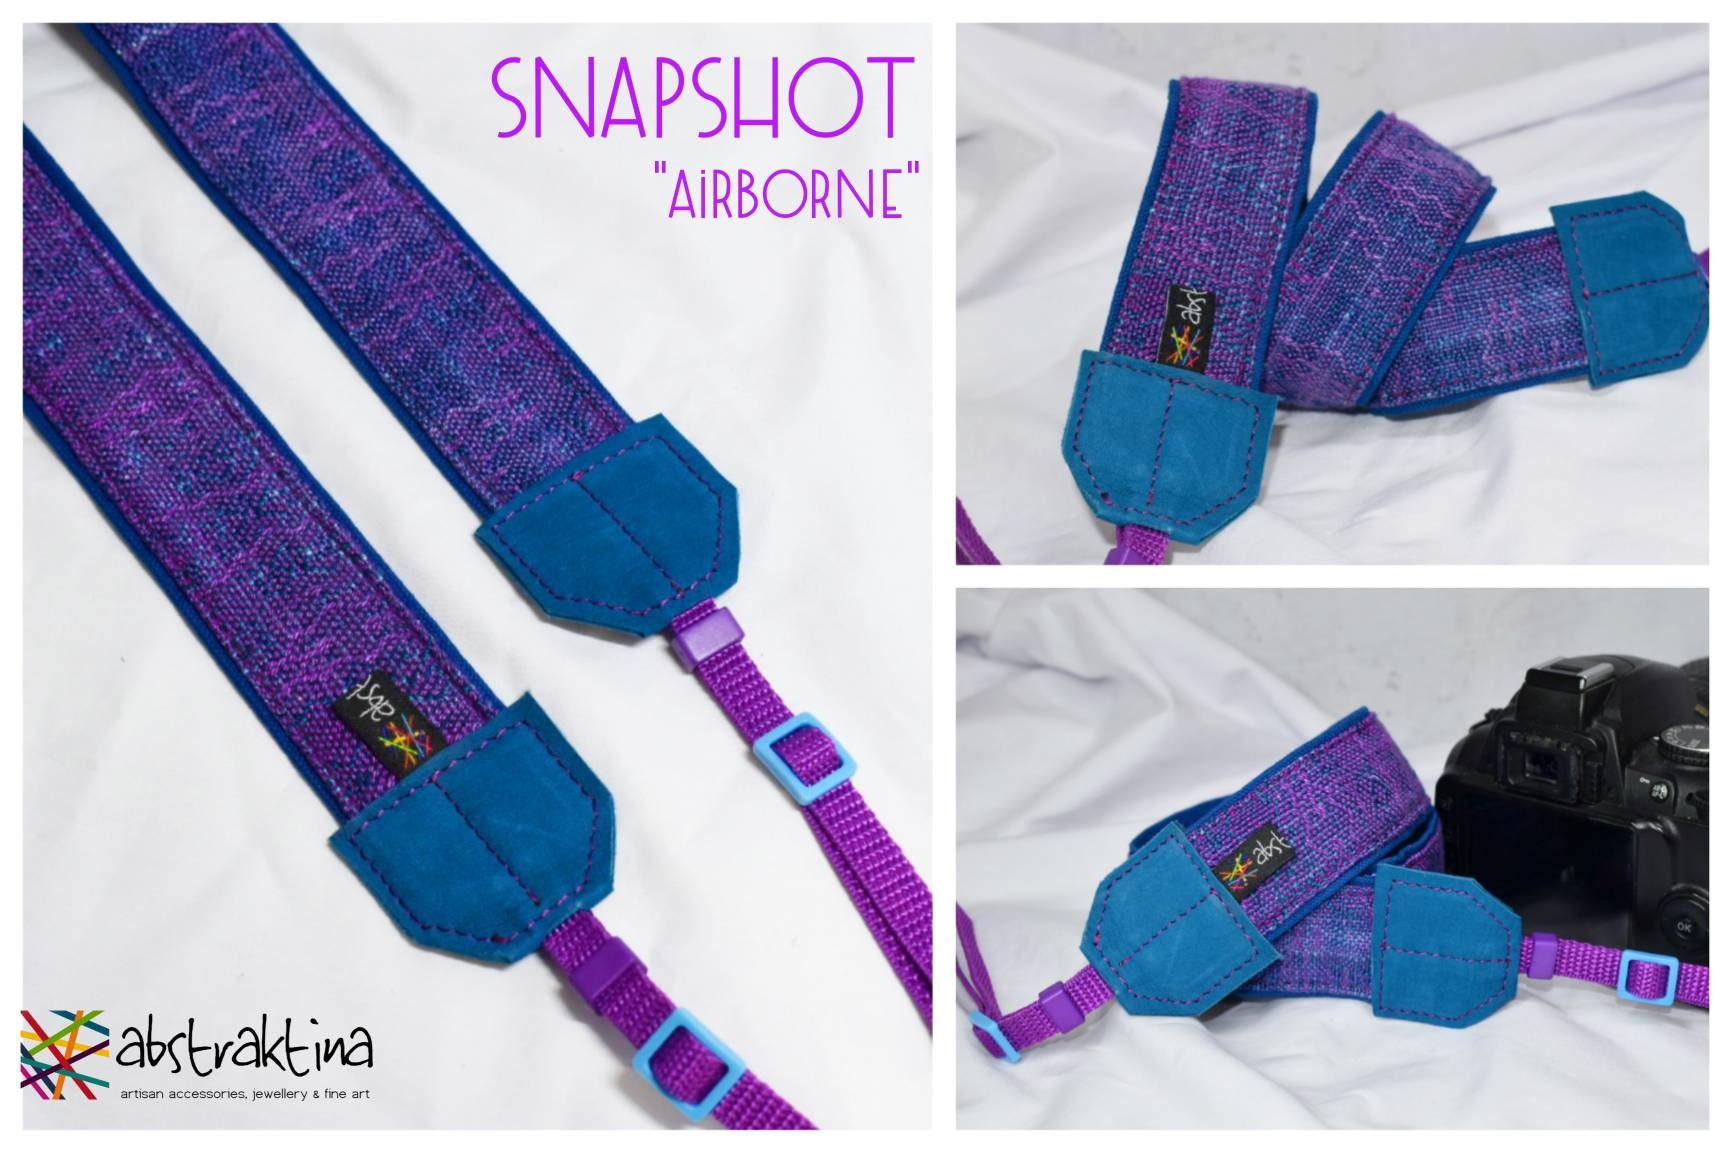 One-of-a-kind SNAPSHOT Camera Strap airborne by 